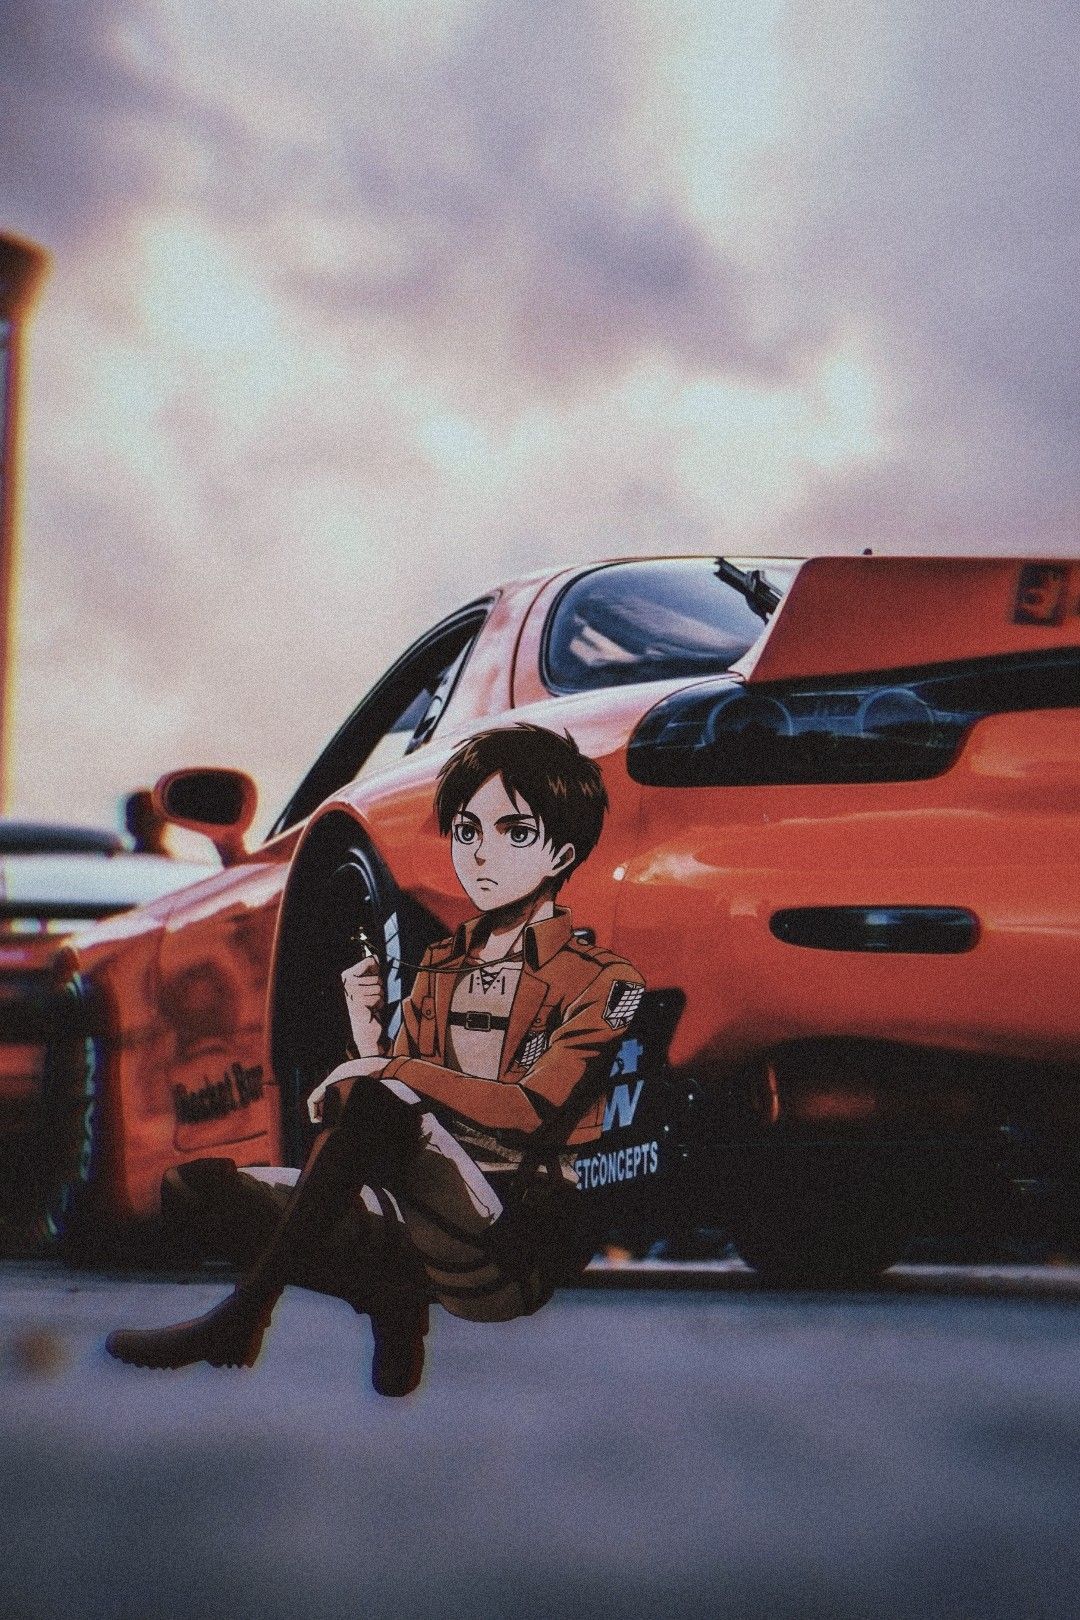 A Collection of JDM X ANIME WALLPAPER MADE BY ME. Jdm wallpaper, Car wallpaper, Anime wallpaper